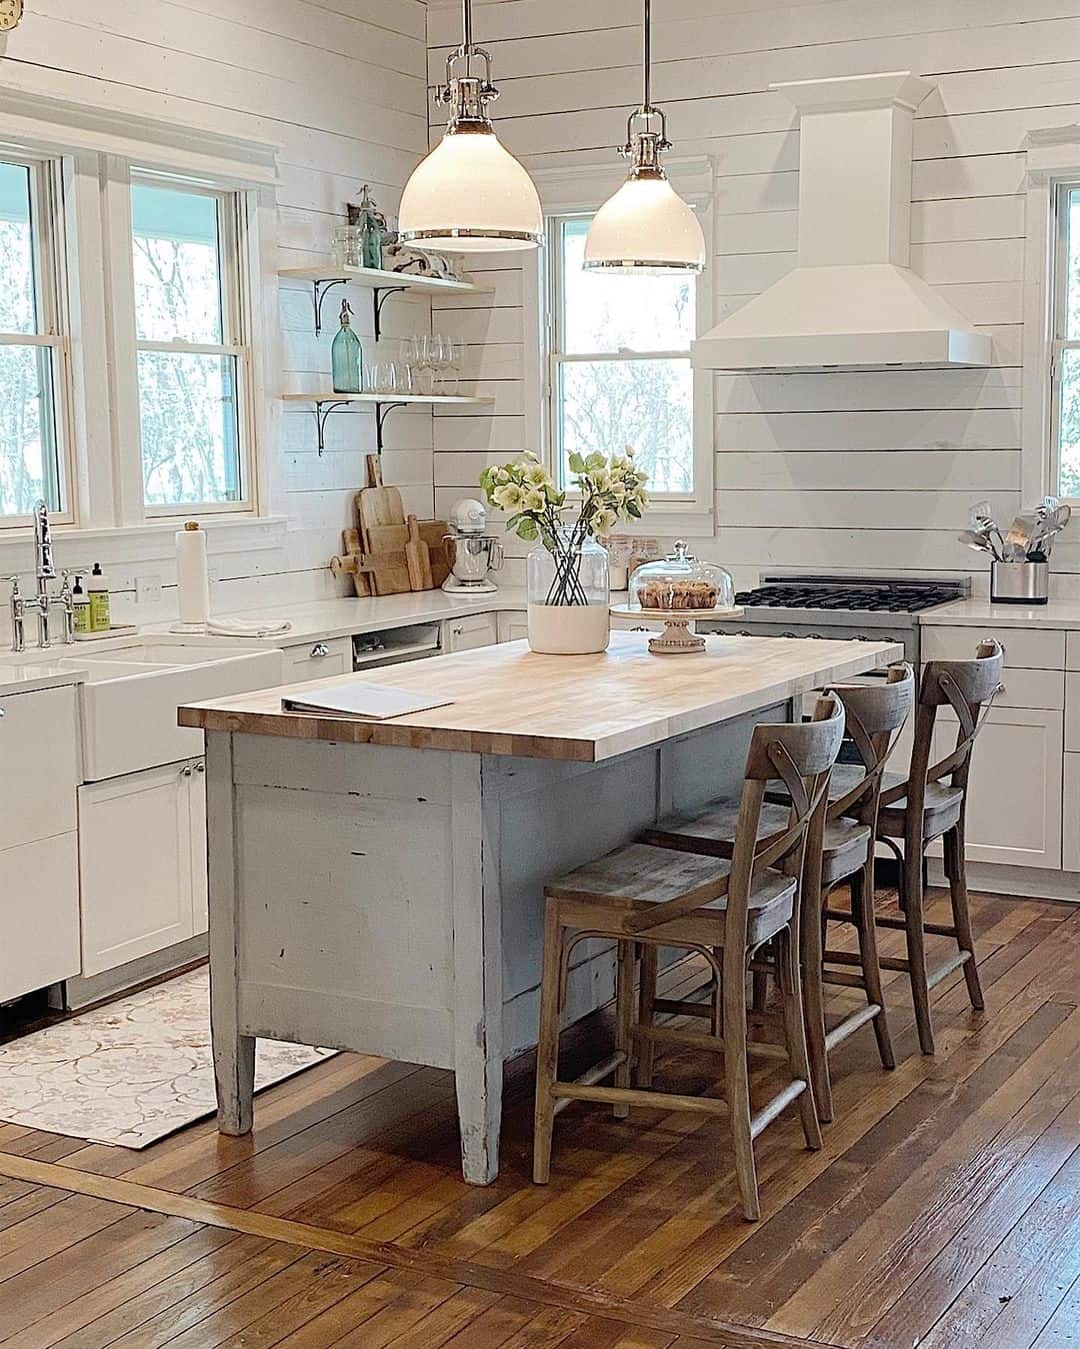 Rustic Elegance Meets Shiplap in the Kitchen